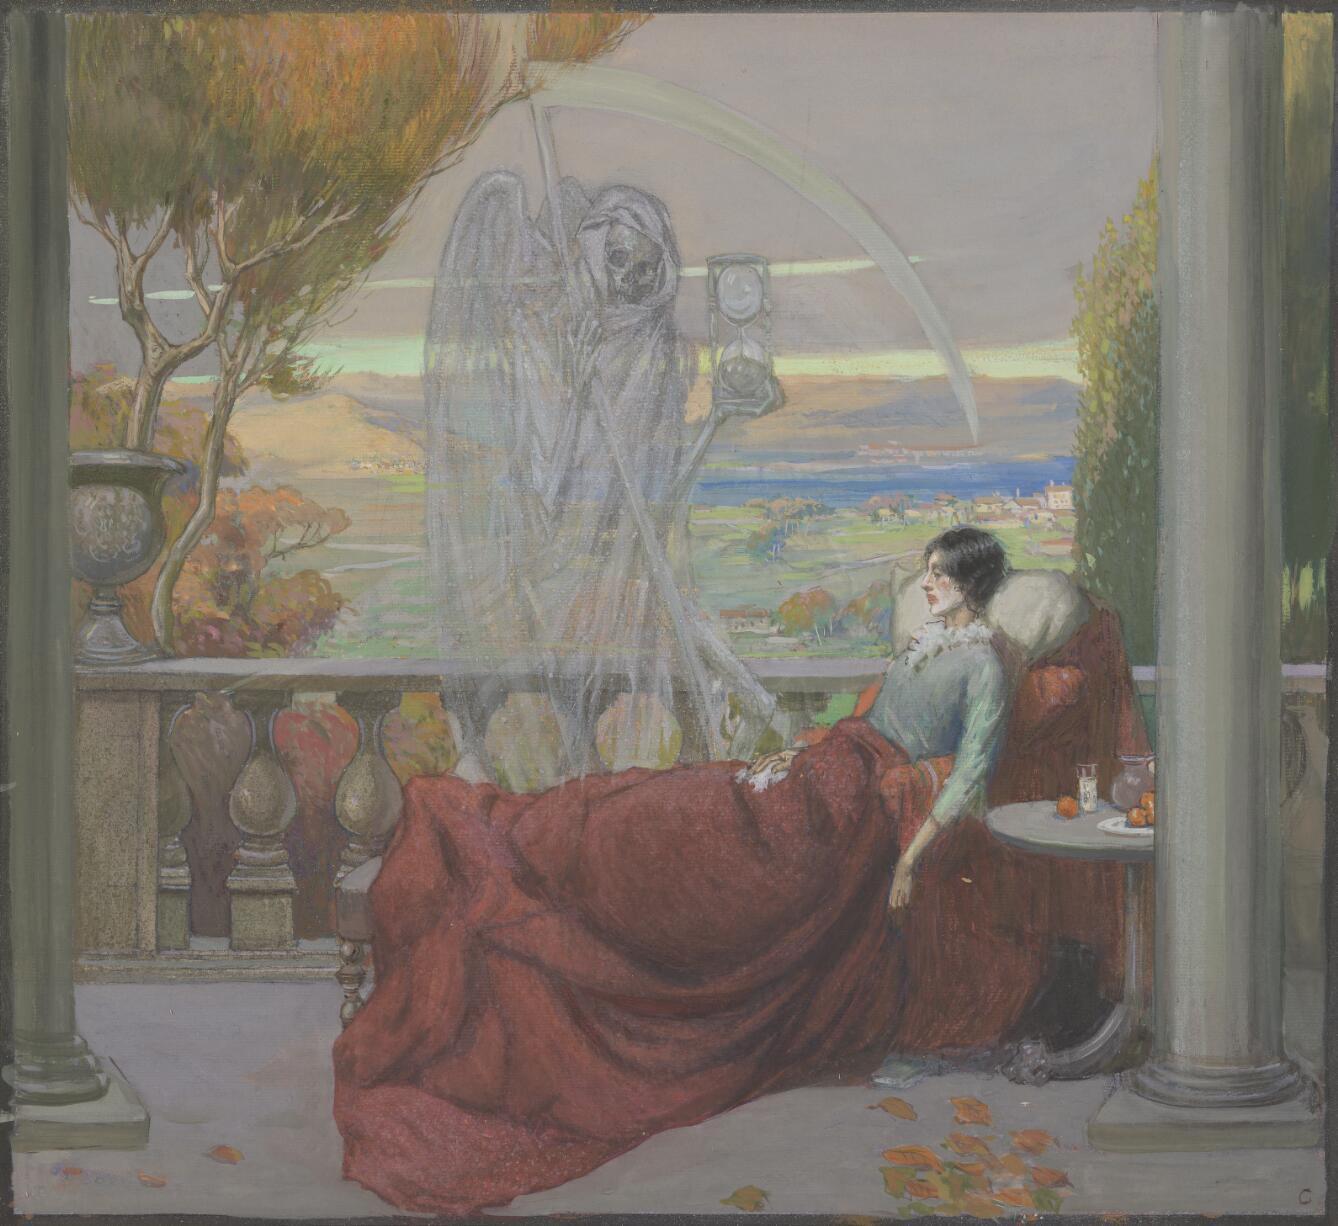 Watercolor by R. Cooper, c. 1912. Depicts a sickly young woman sitting covered up on a balcony; Death (a ghostly skeleton clutching a scythe and an hourglass) is standing next to her; representing tuberculosis.